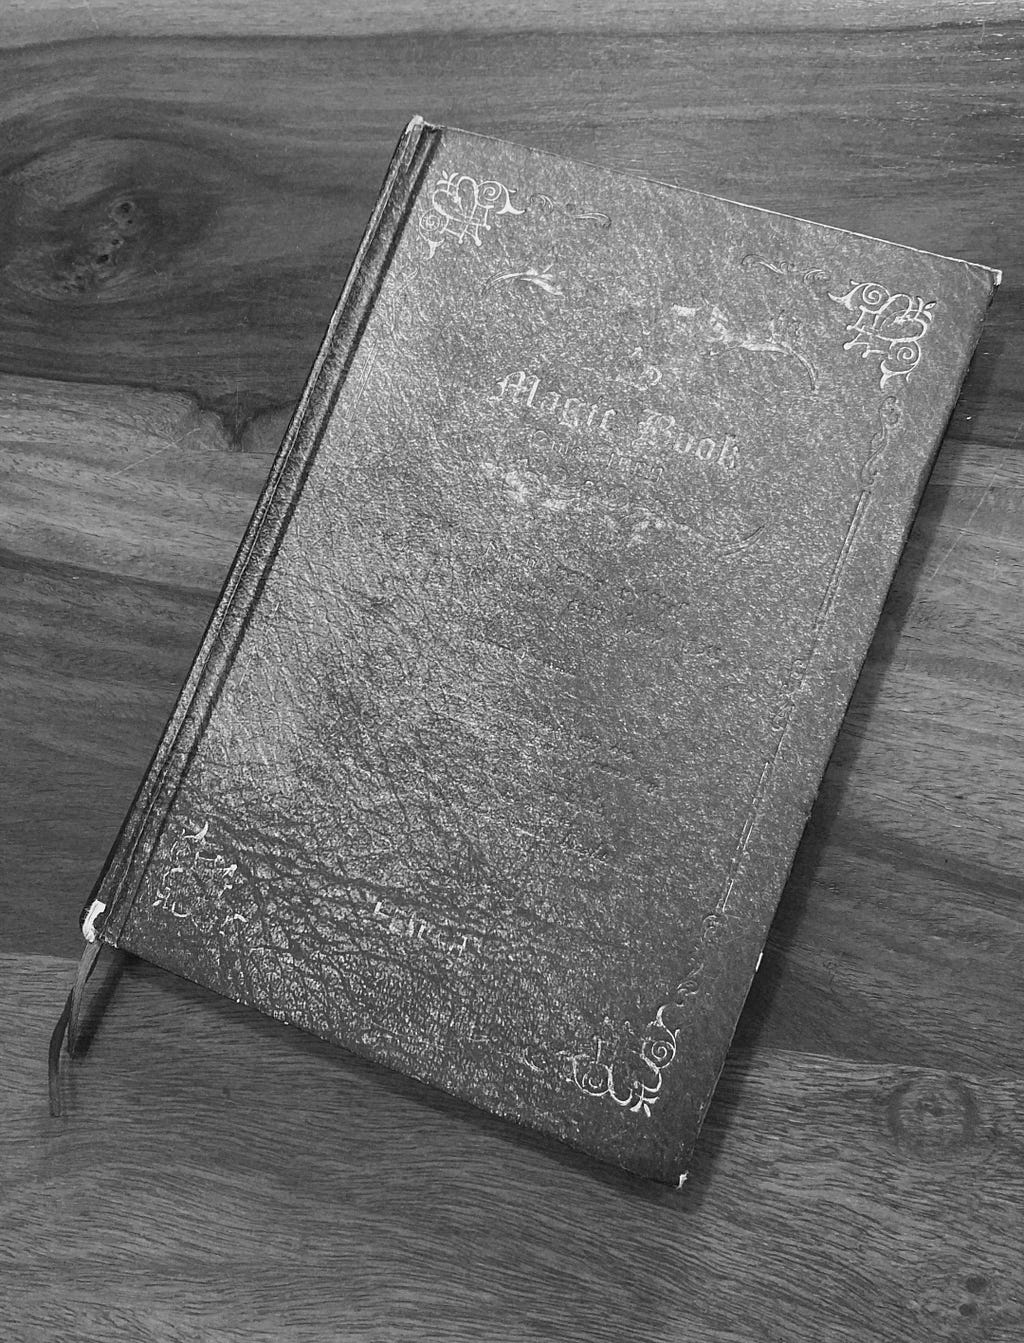 Grayscale picture of a notebook on a wooden table